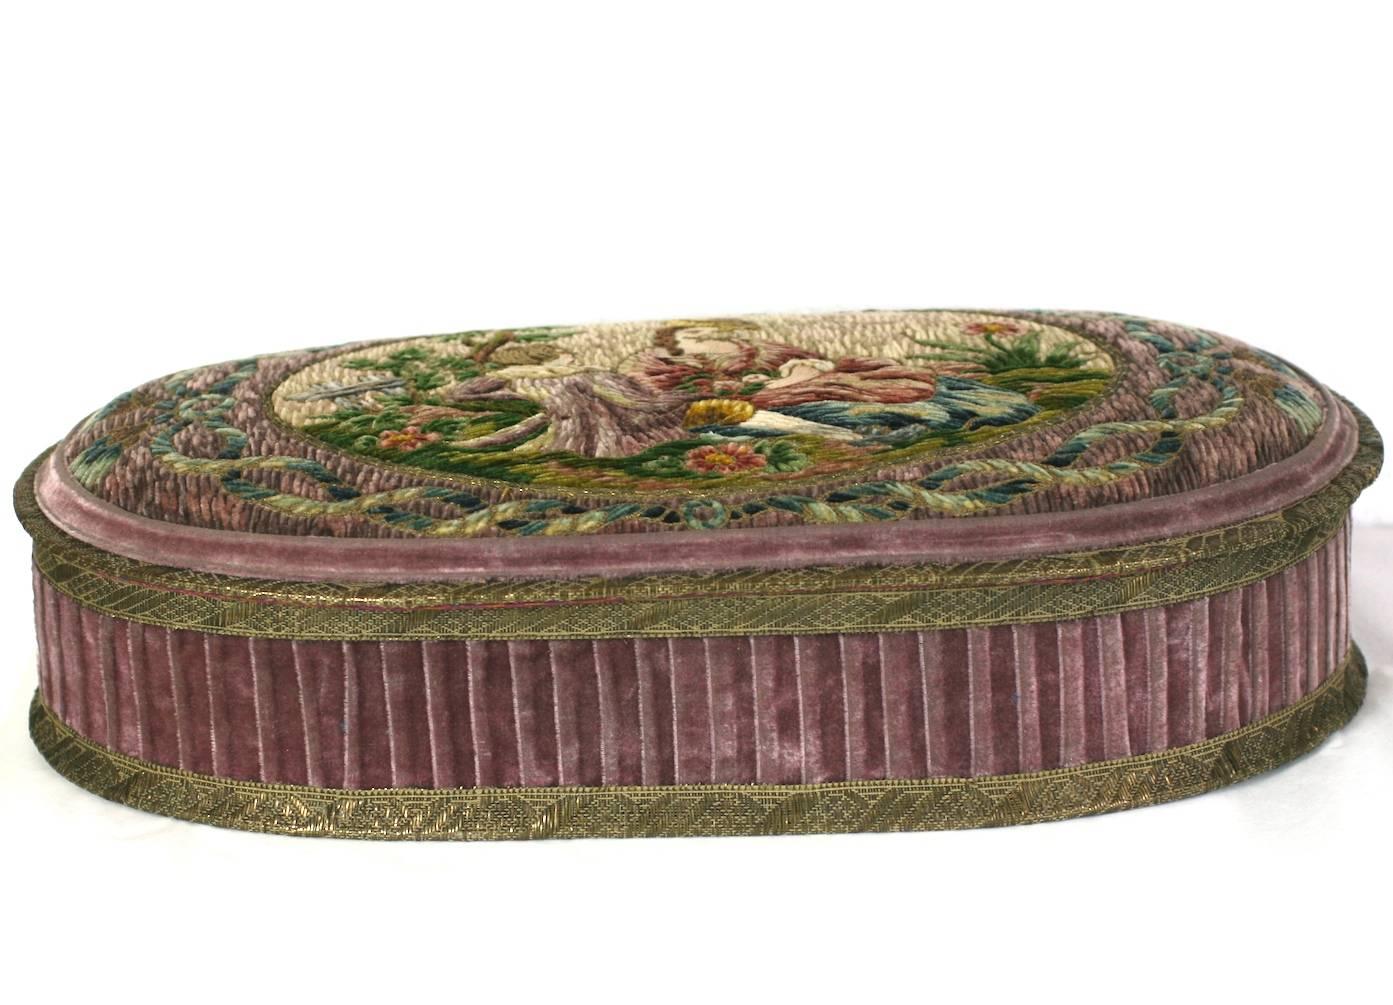 Wonderful  Deco French Boudoir Box with hand stitched chenille embroidery. A pastoral scene with a couple lounging in the grass is beautifully rendered in colorful silk yarns and trimmed in antique gold lame tape. A twisted rope motif with tassels